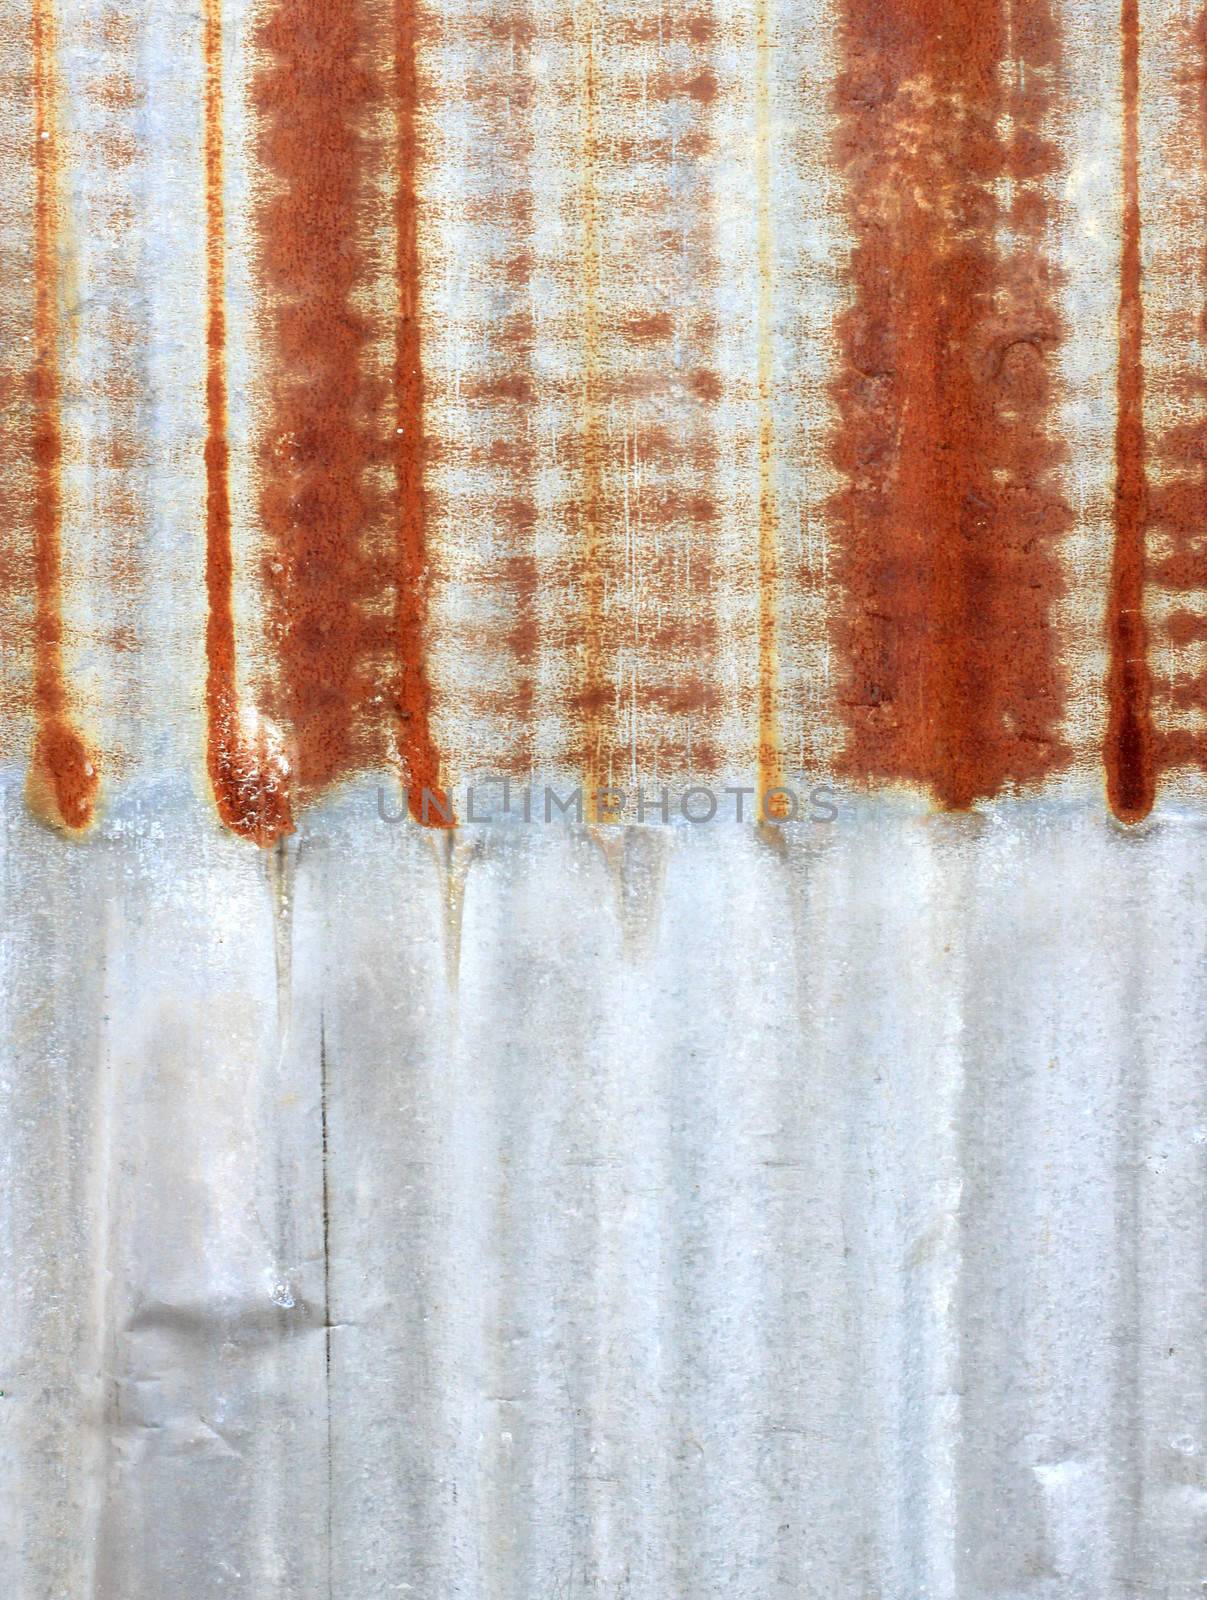 A rusty corrugated iron metal texture by nuchylee